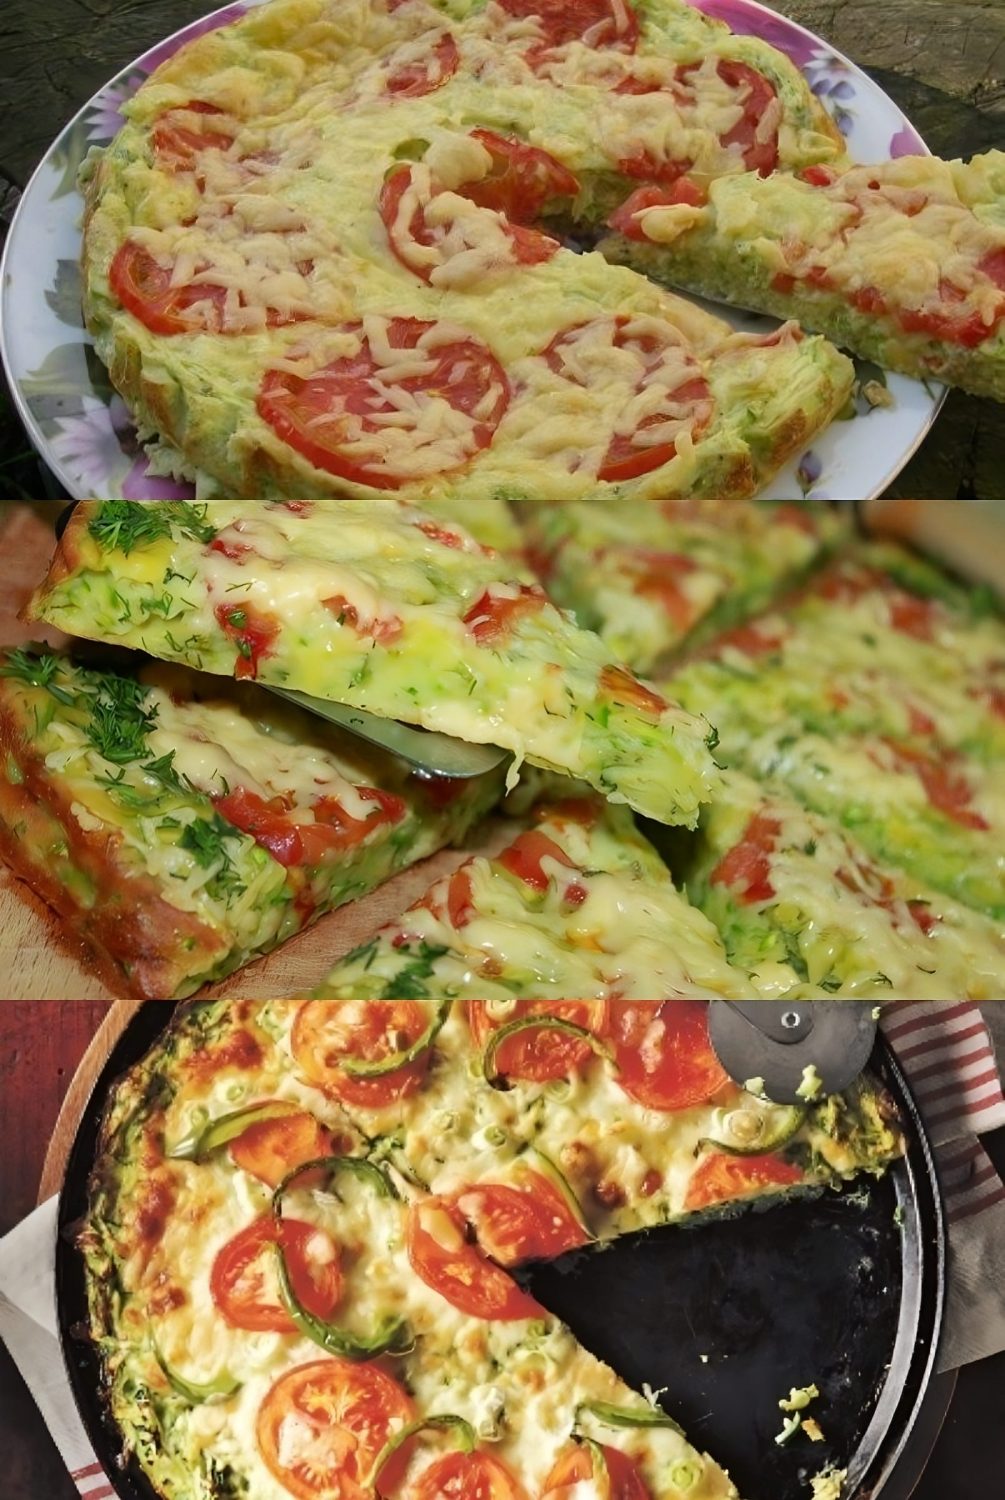 Zucchini Pizza Delight: A Healthy and Tasty Snack Twist!